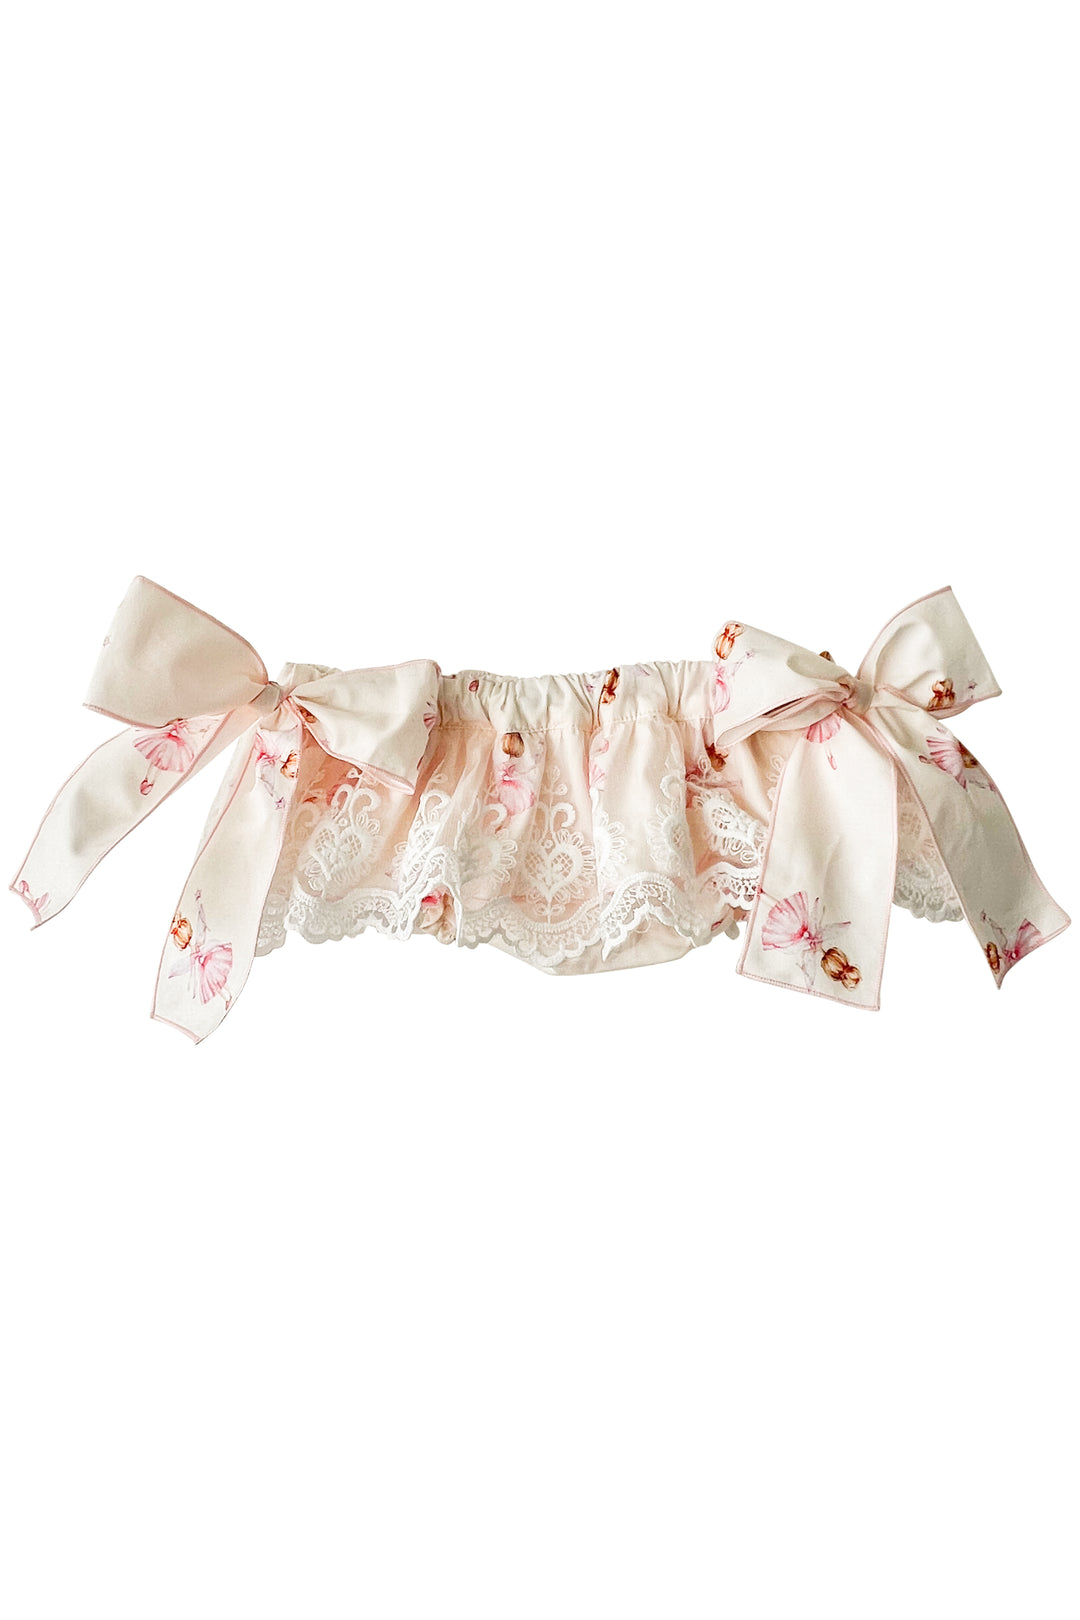 Phi "Adelina" Pink Fairy Print Bloomers | Millie and John